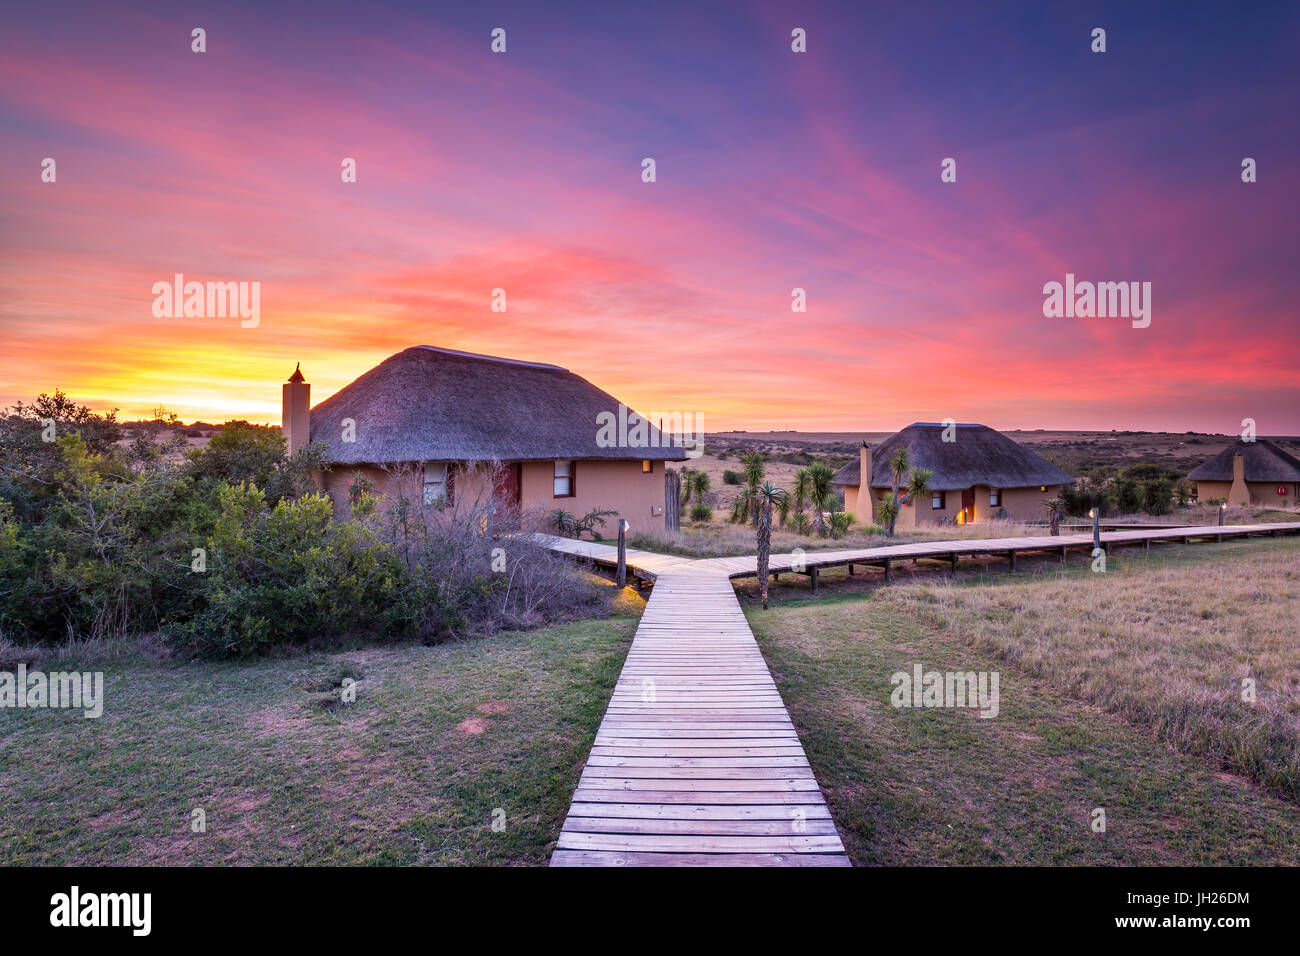 Hlosi Game Lodge during a spectacular sunset over the Amakhala Game Reserve on the Eastern Cape, South Africa, Africa Stock Photo